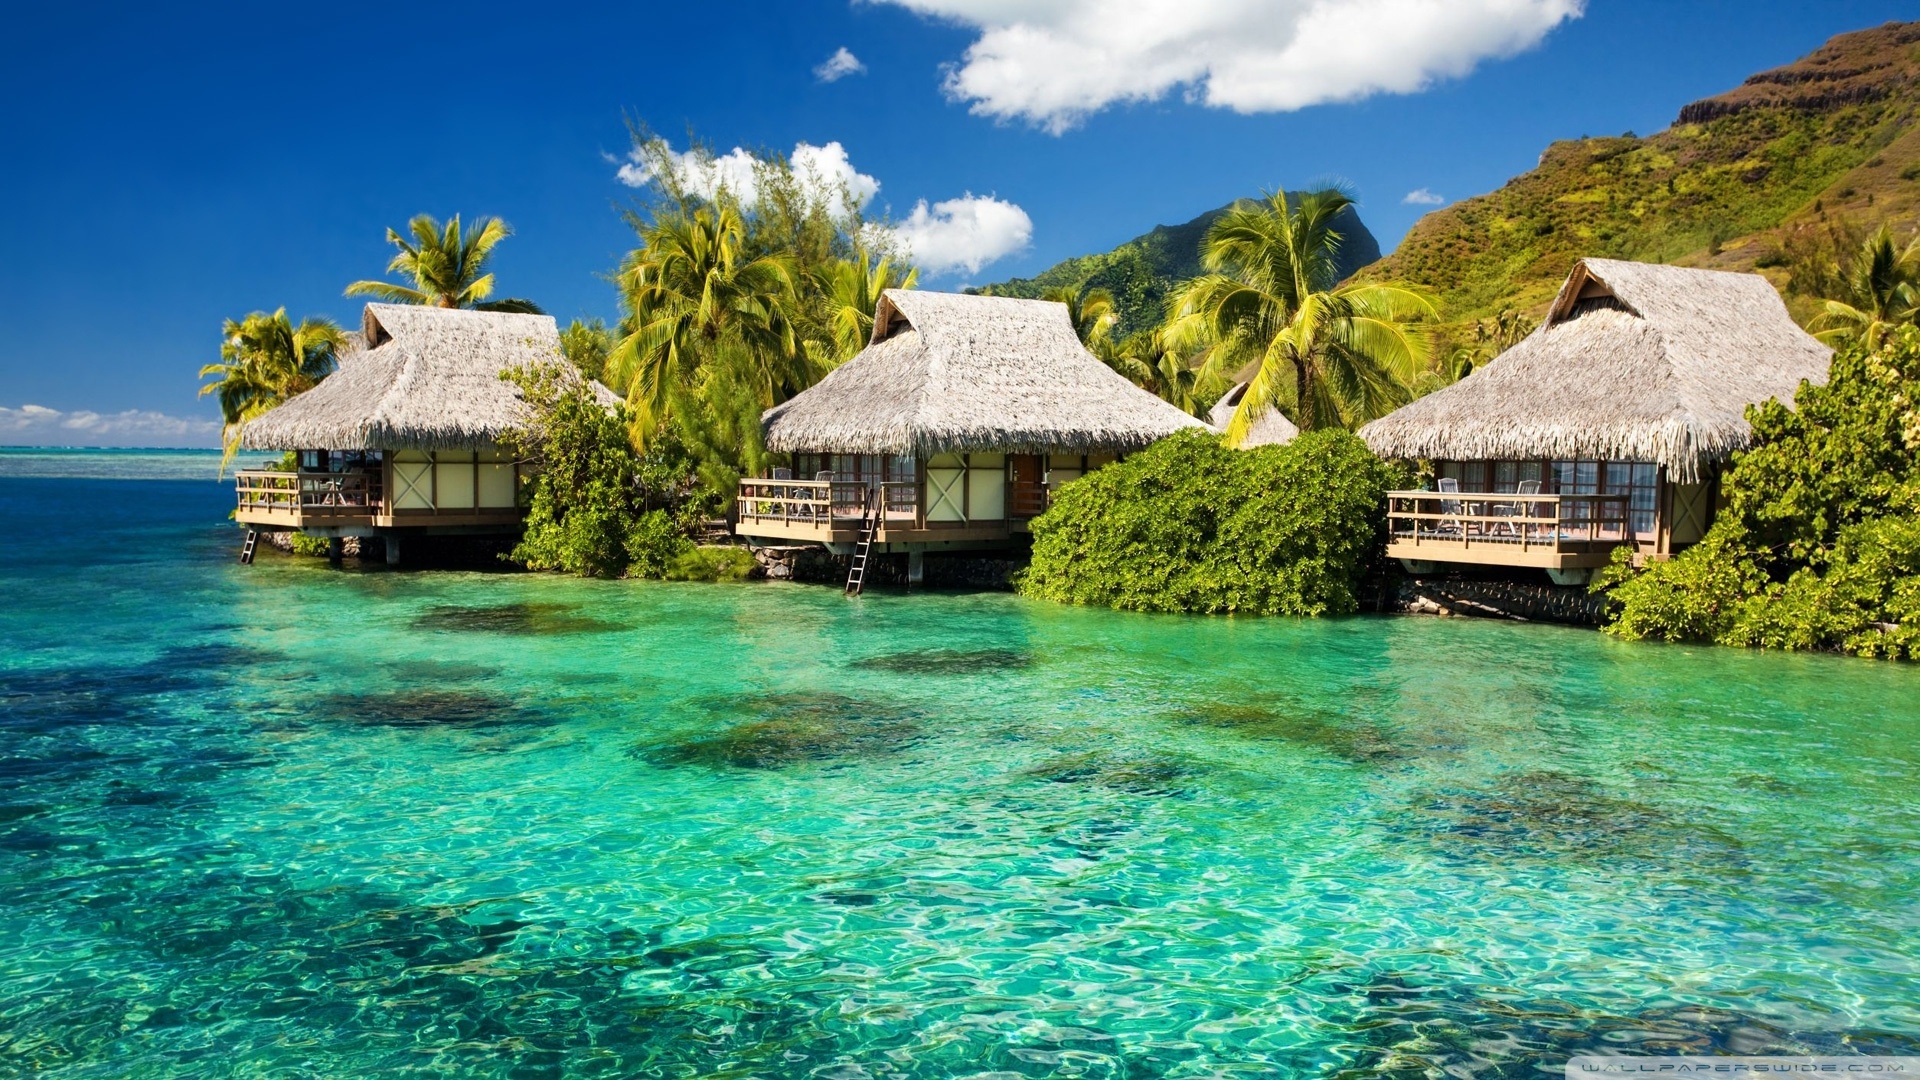  Tropical Island Wallpaper 1920x1080 Water Bungalows On A Tropical